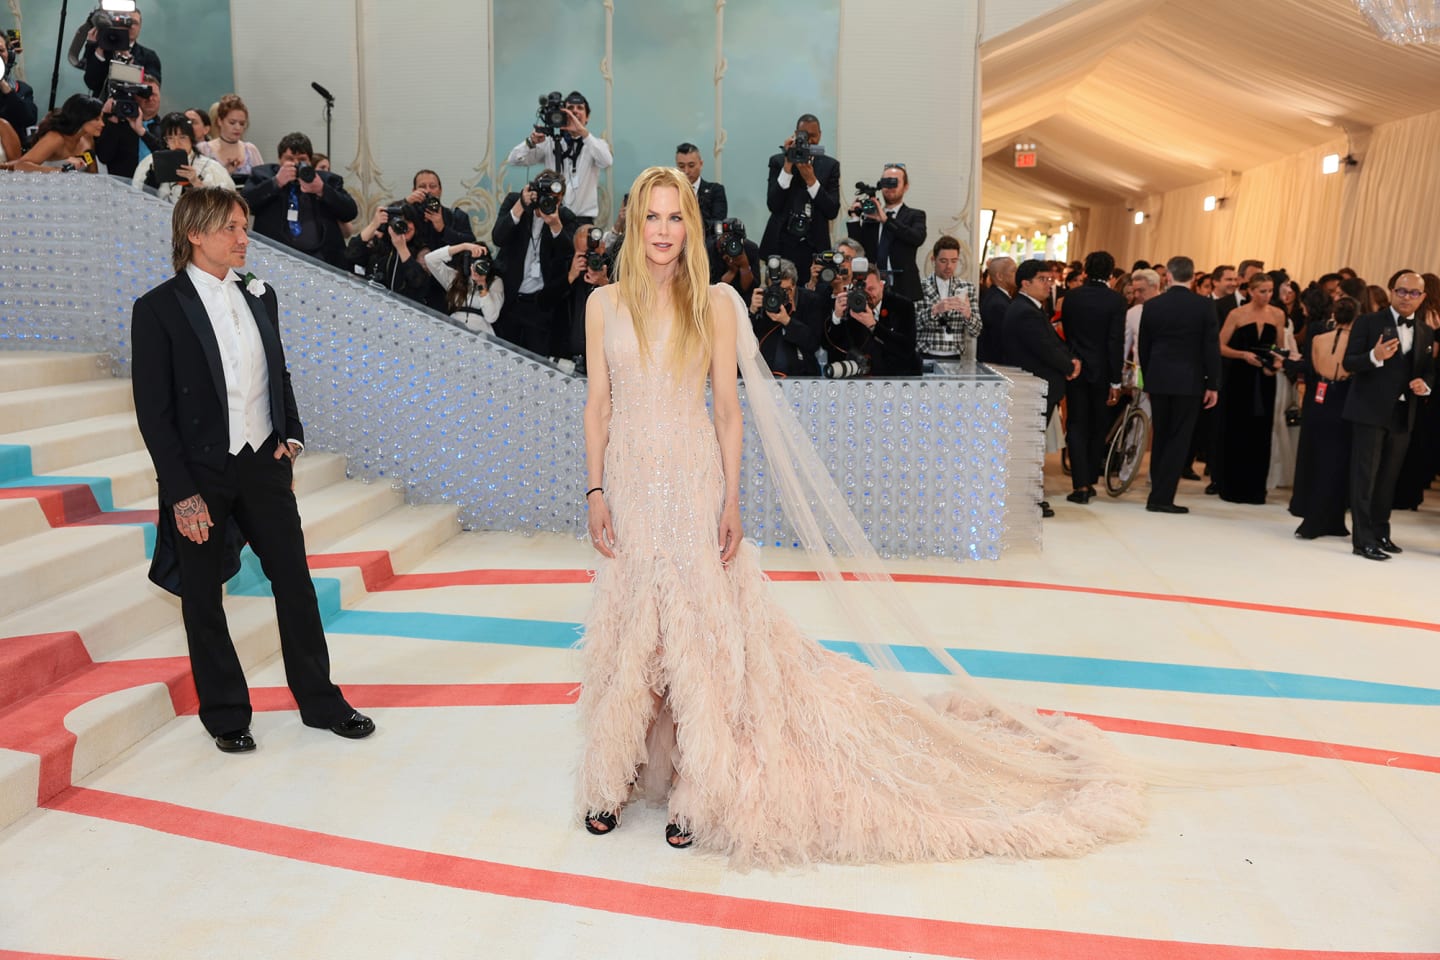 Nicole Kidman arrived in a gown familiar to anyone with a TV in the 2000s: the same feathered blush gown she wore in the dramatic, romantic Chanel No 5 commercial directed by Baz Luhrmann.